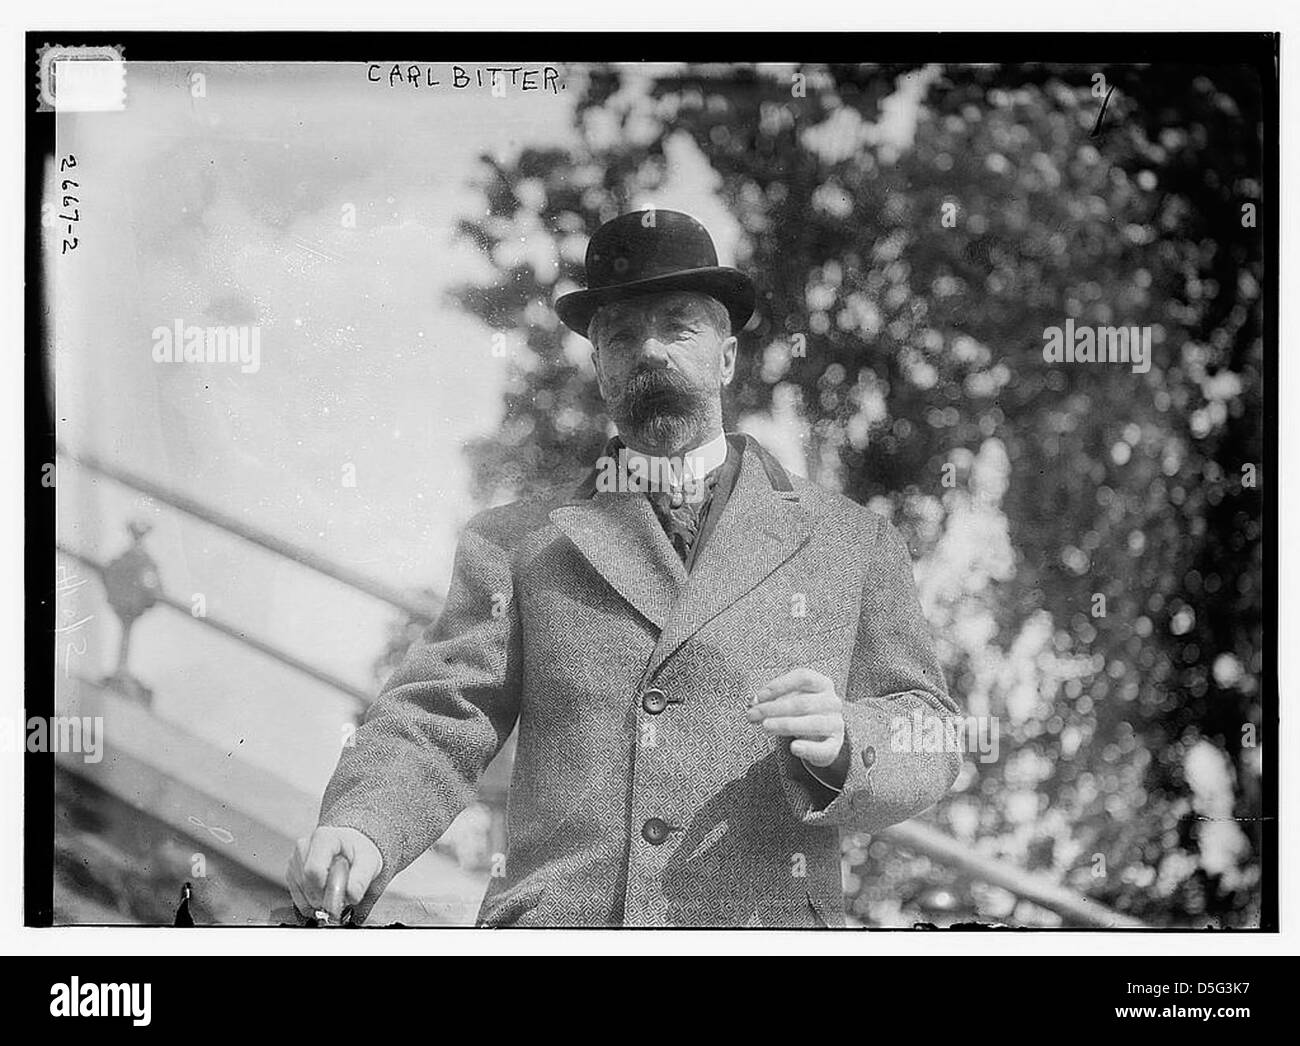 Karl bitter Black and White Stock Photos & Images - Alamy